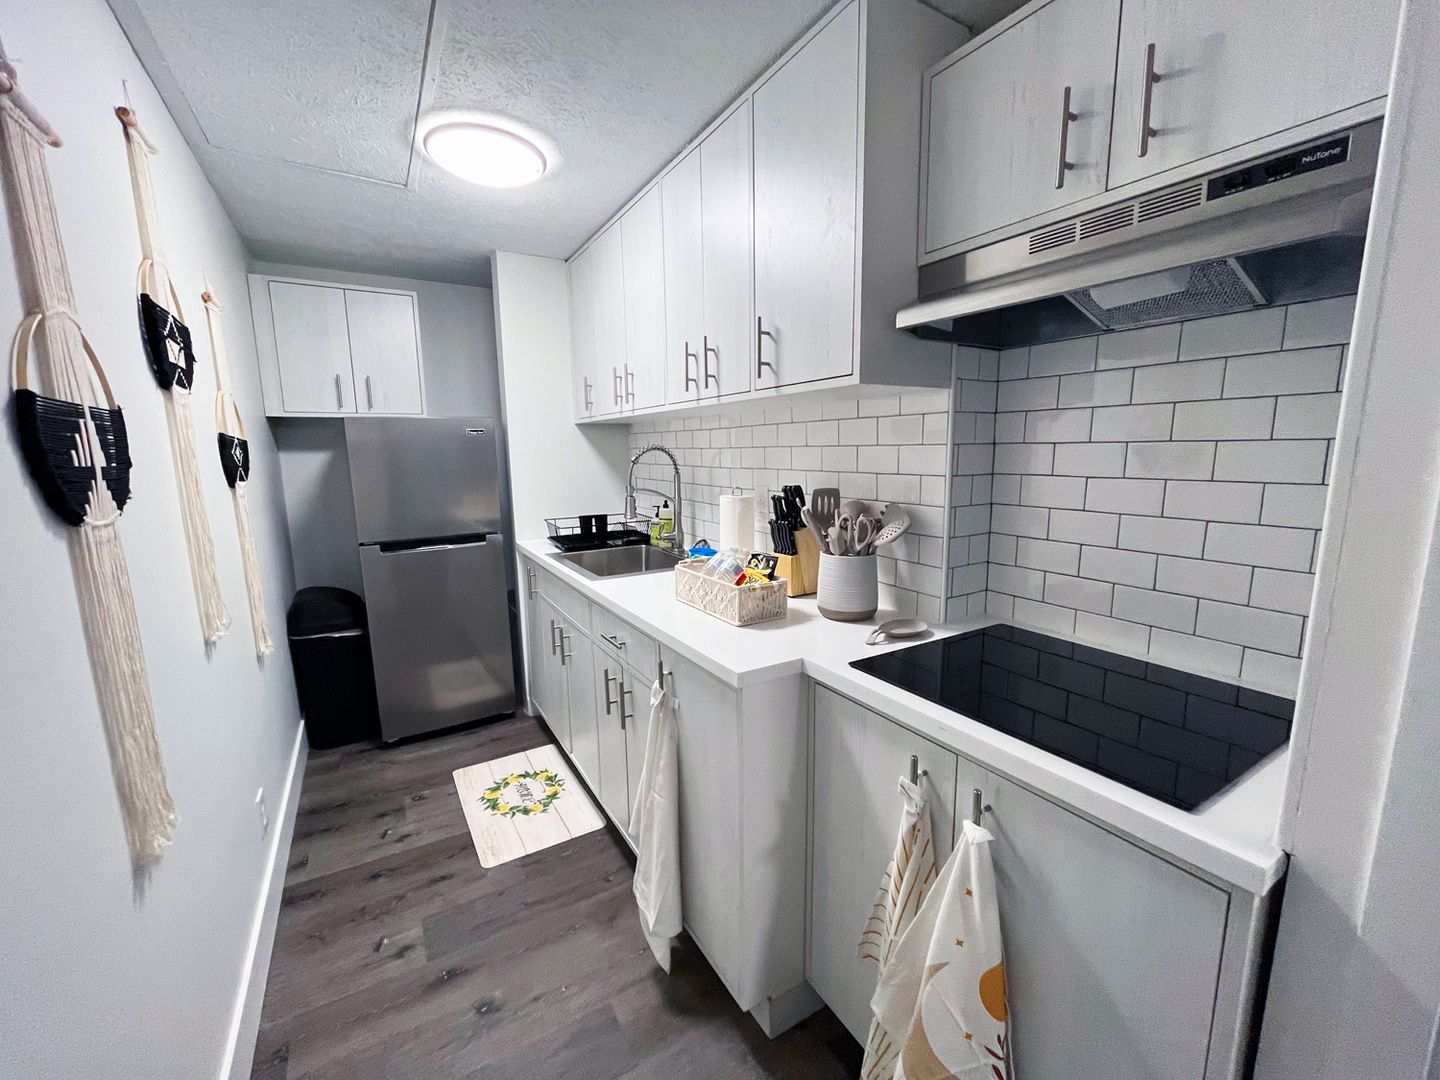 1 Bed and 1 Bath Apartments with In-Unit Laundry for Rent | Entirely Renovated Thumbnail